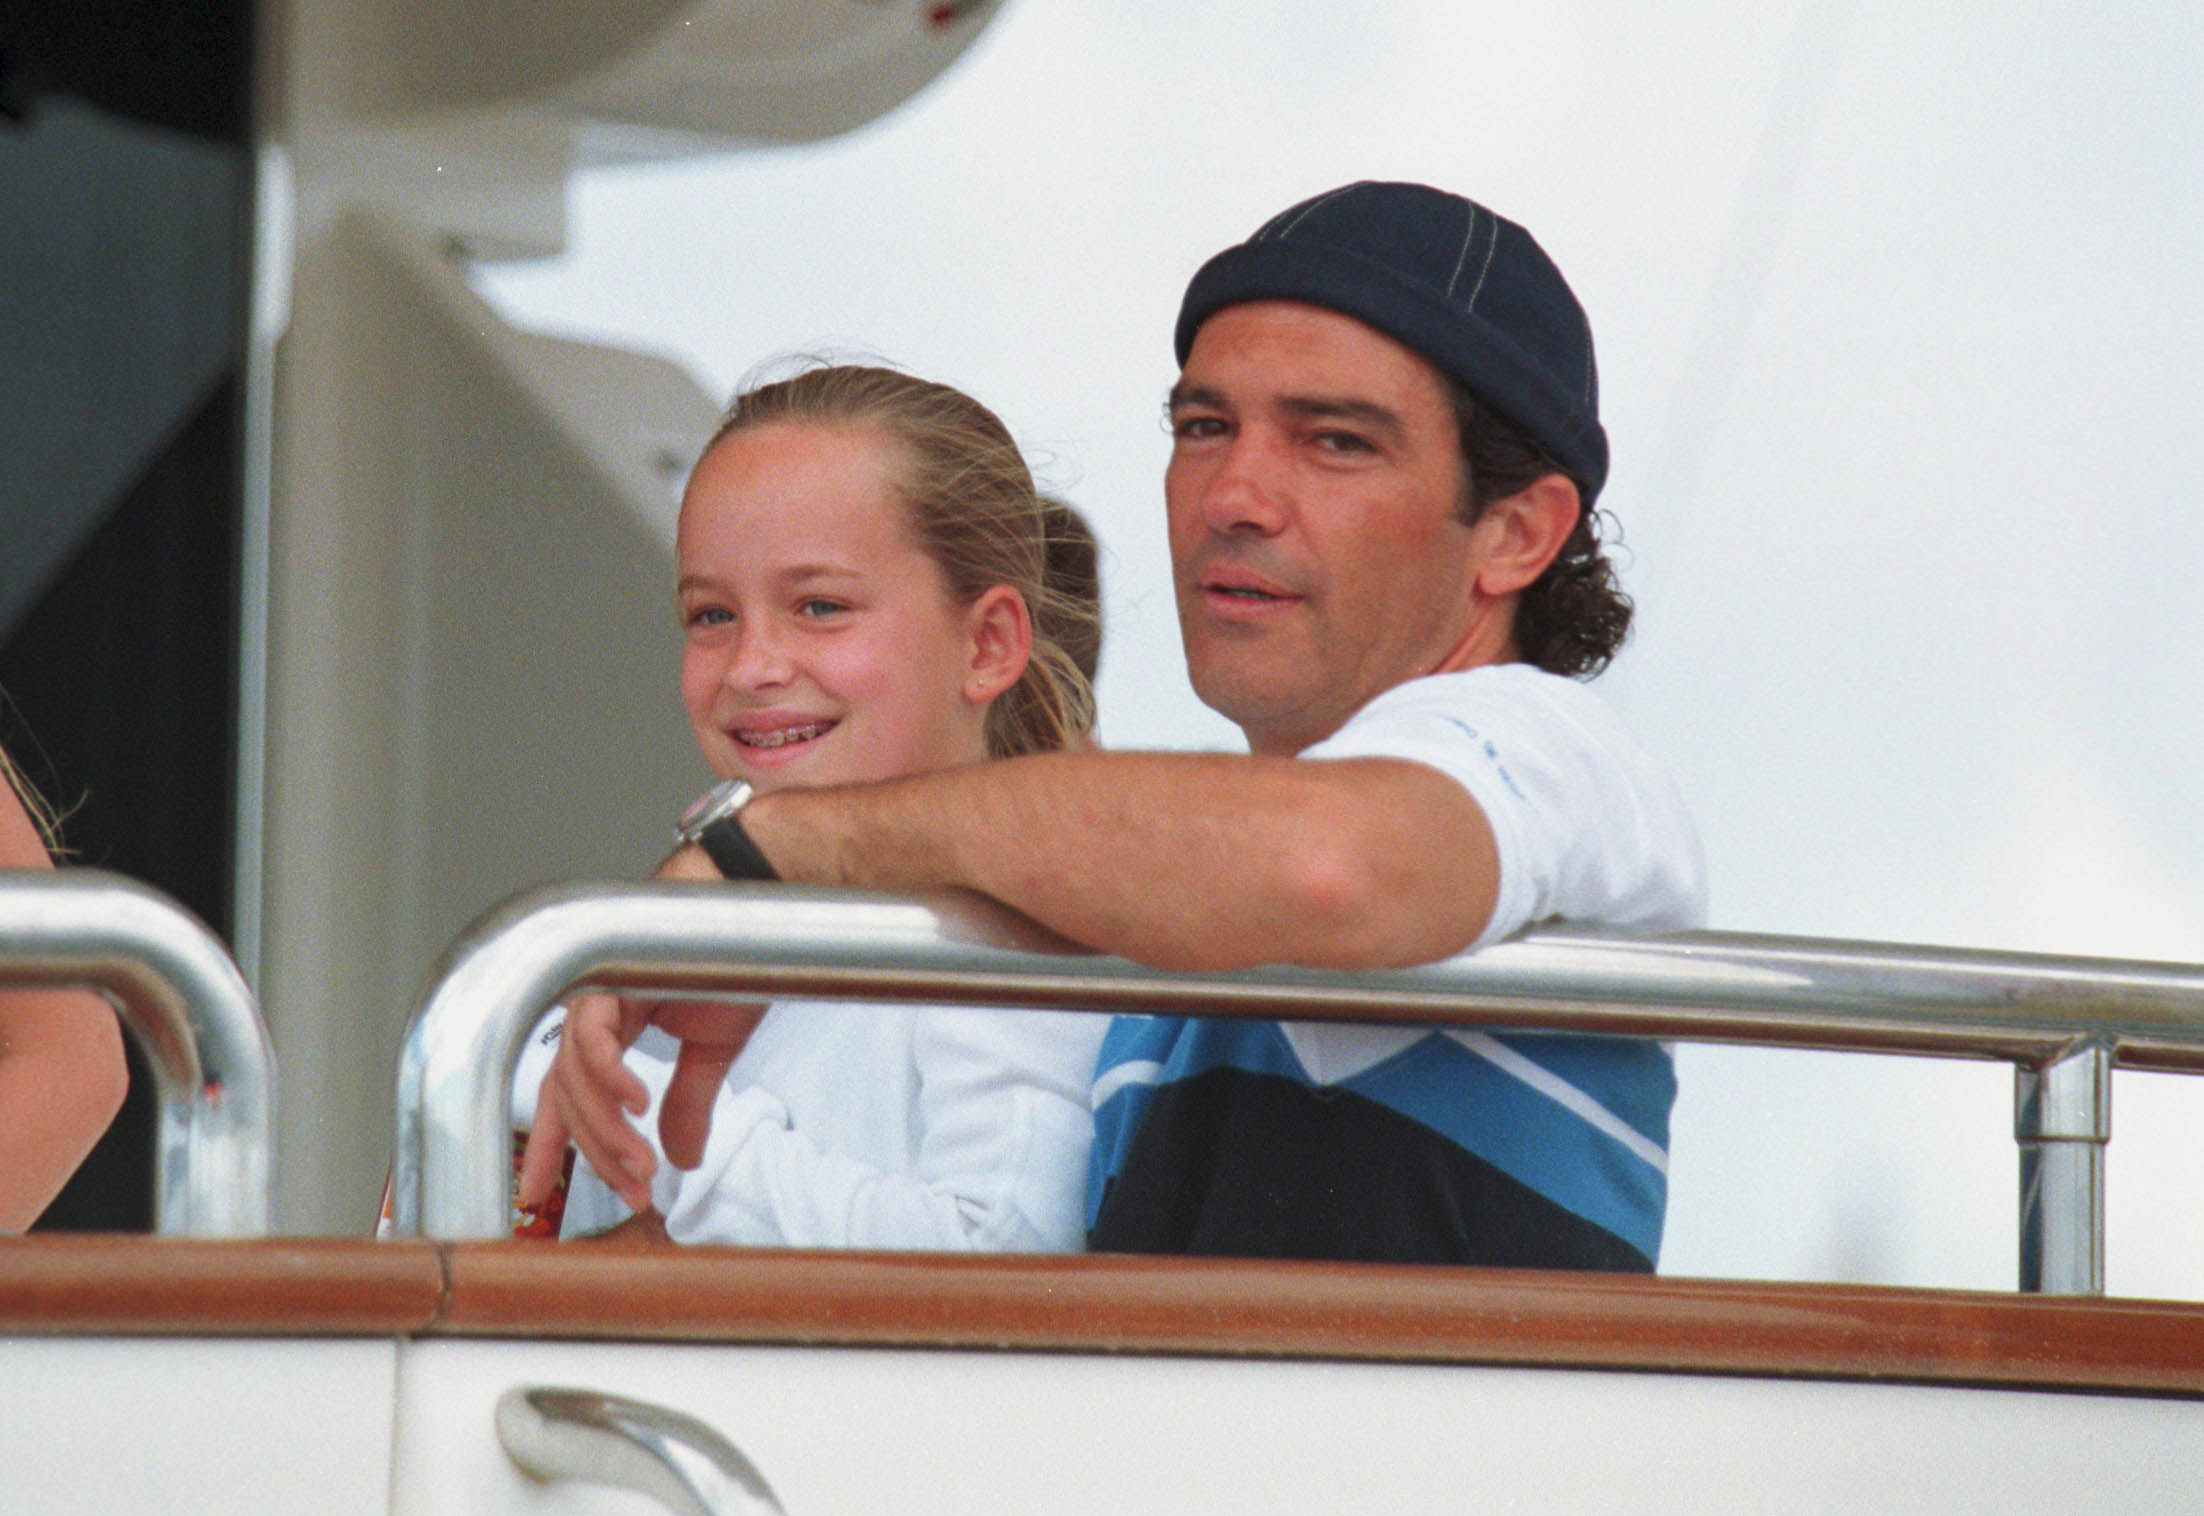 Antonio Banderas and Dakota Johnson on a yacht during the Copa del Ray regatta on August 6, 2000 | Source: Getty Images